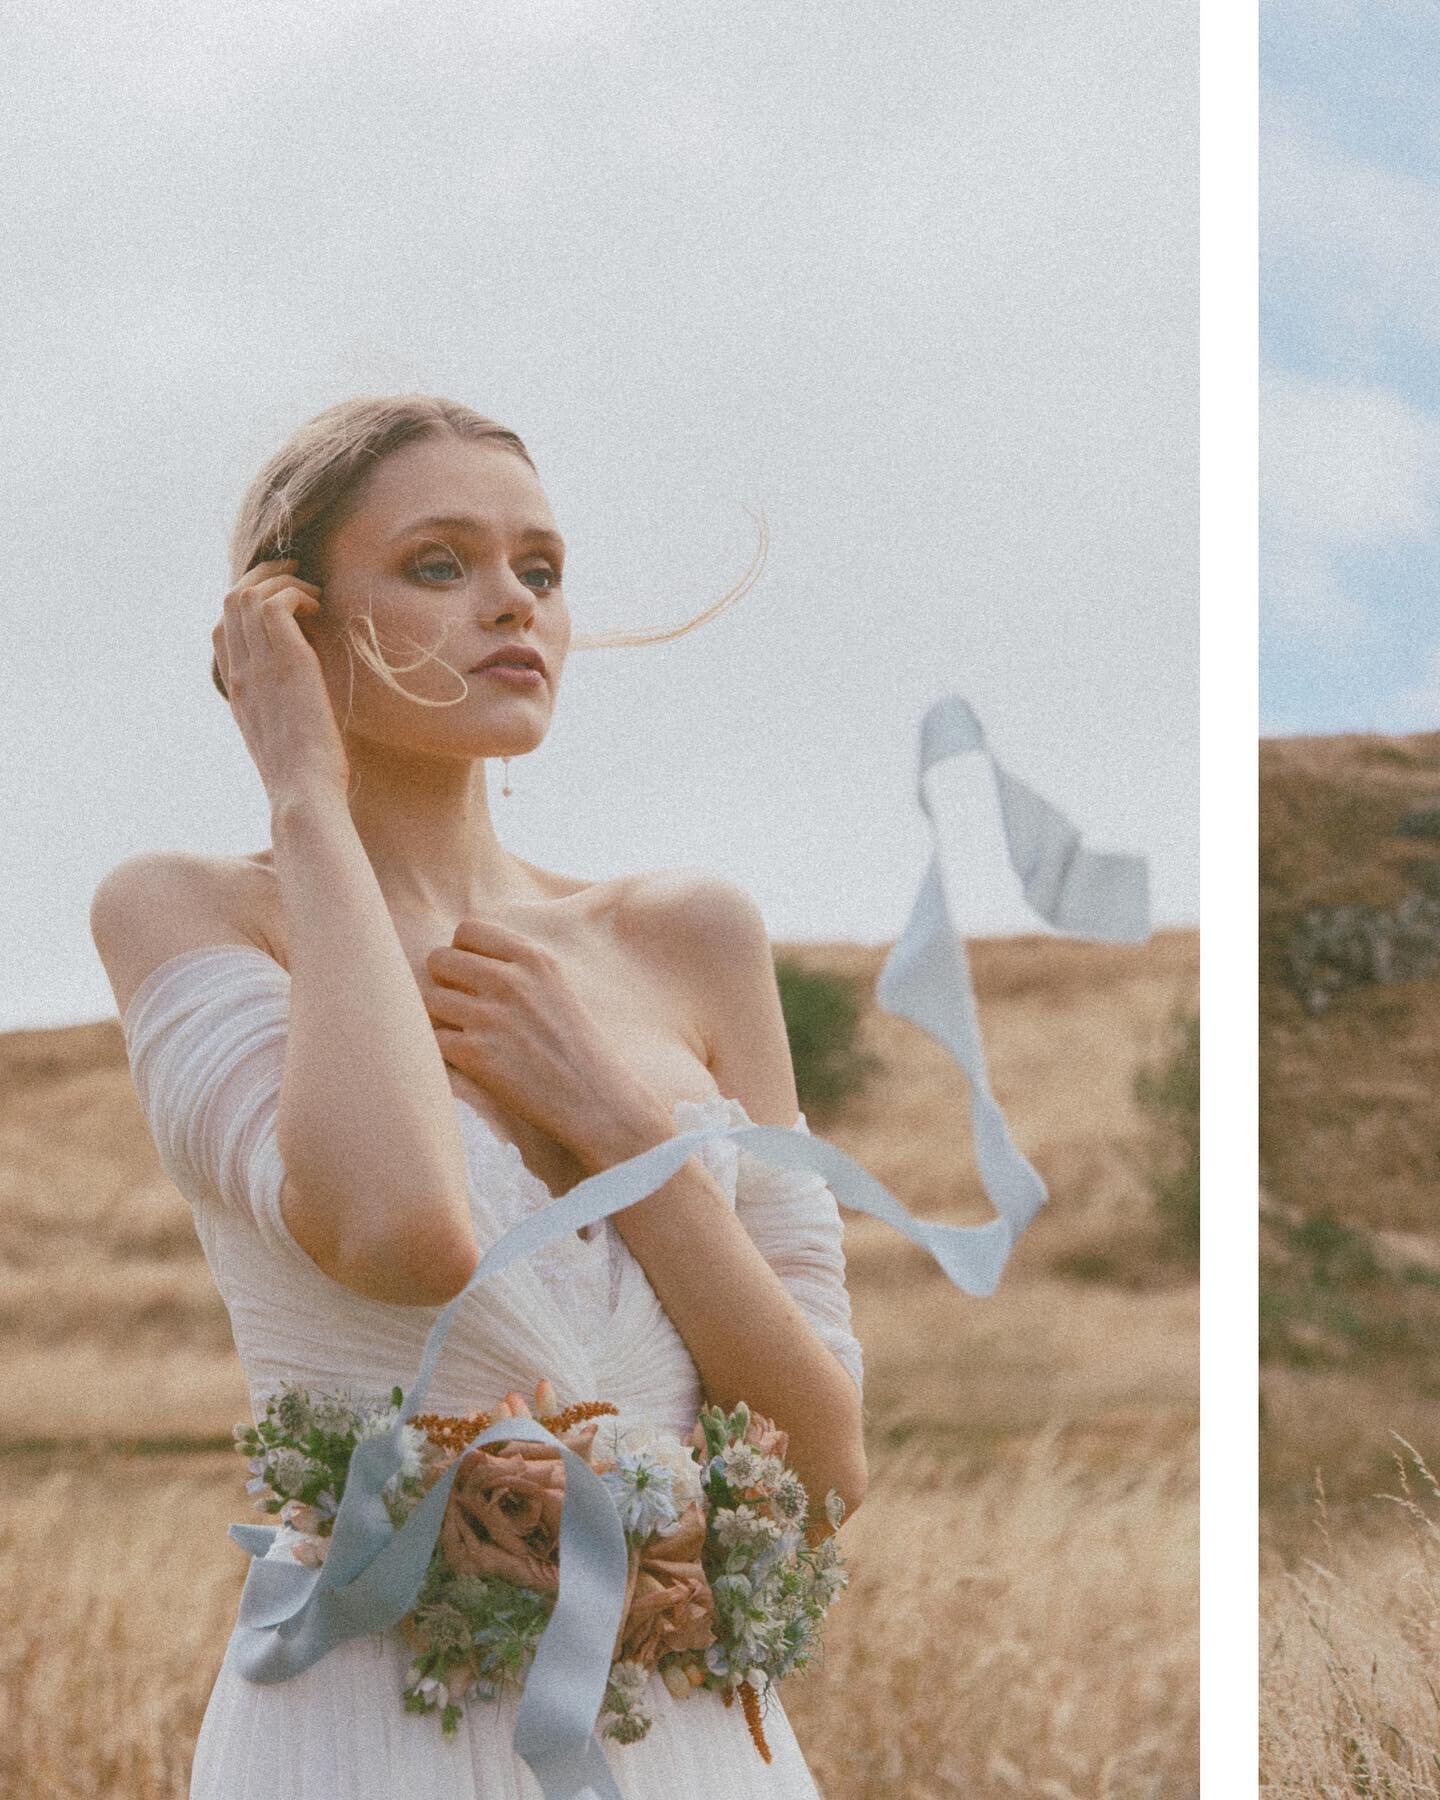 Swirling, twirling ribbons in the breeze&mdash;whimsical, pastel florals worn playfully&mdash;friendly, waving, golden grasses&mdash;just a gorgeous day in Holyrood✨

Grateful for the new friends I made in this wonderful team!

Model: @thesaraheve
MU